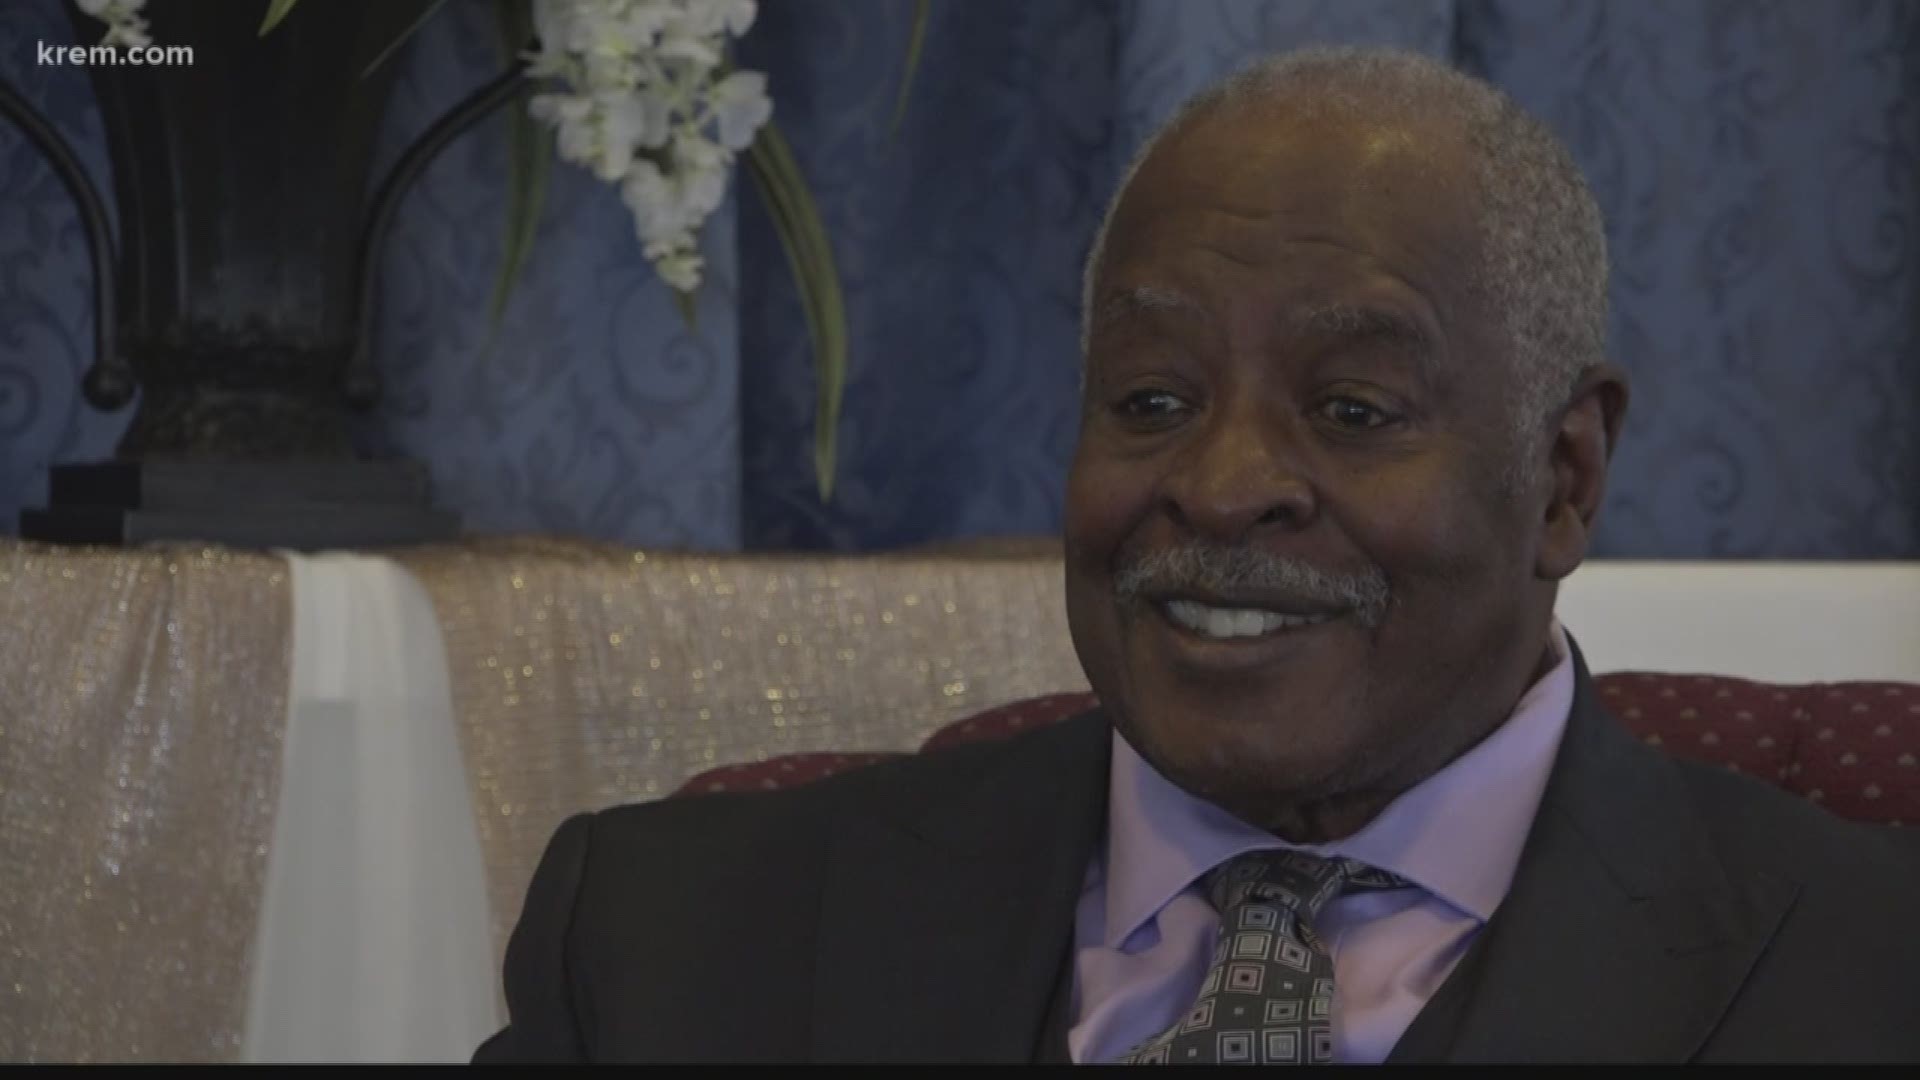 Happy Watkins, a man who came to Spokane originally for the U.S. Air Force, has been spreading messages from the famous civil rights leader for the last 30 years.